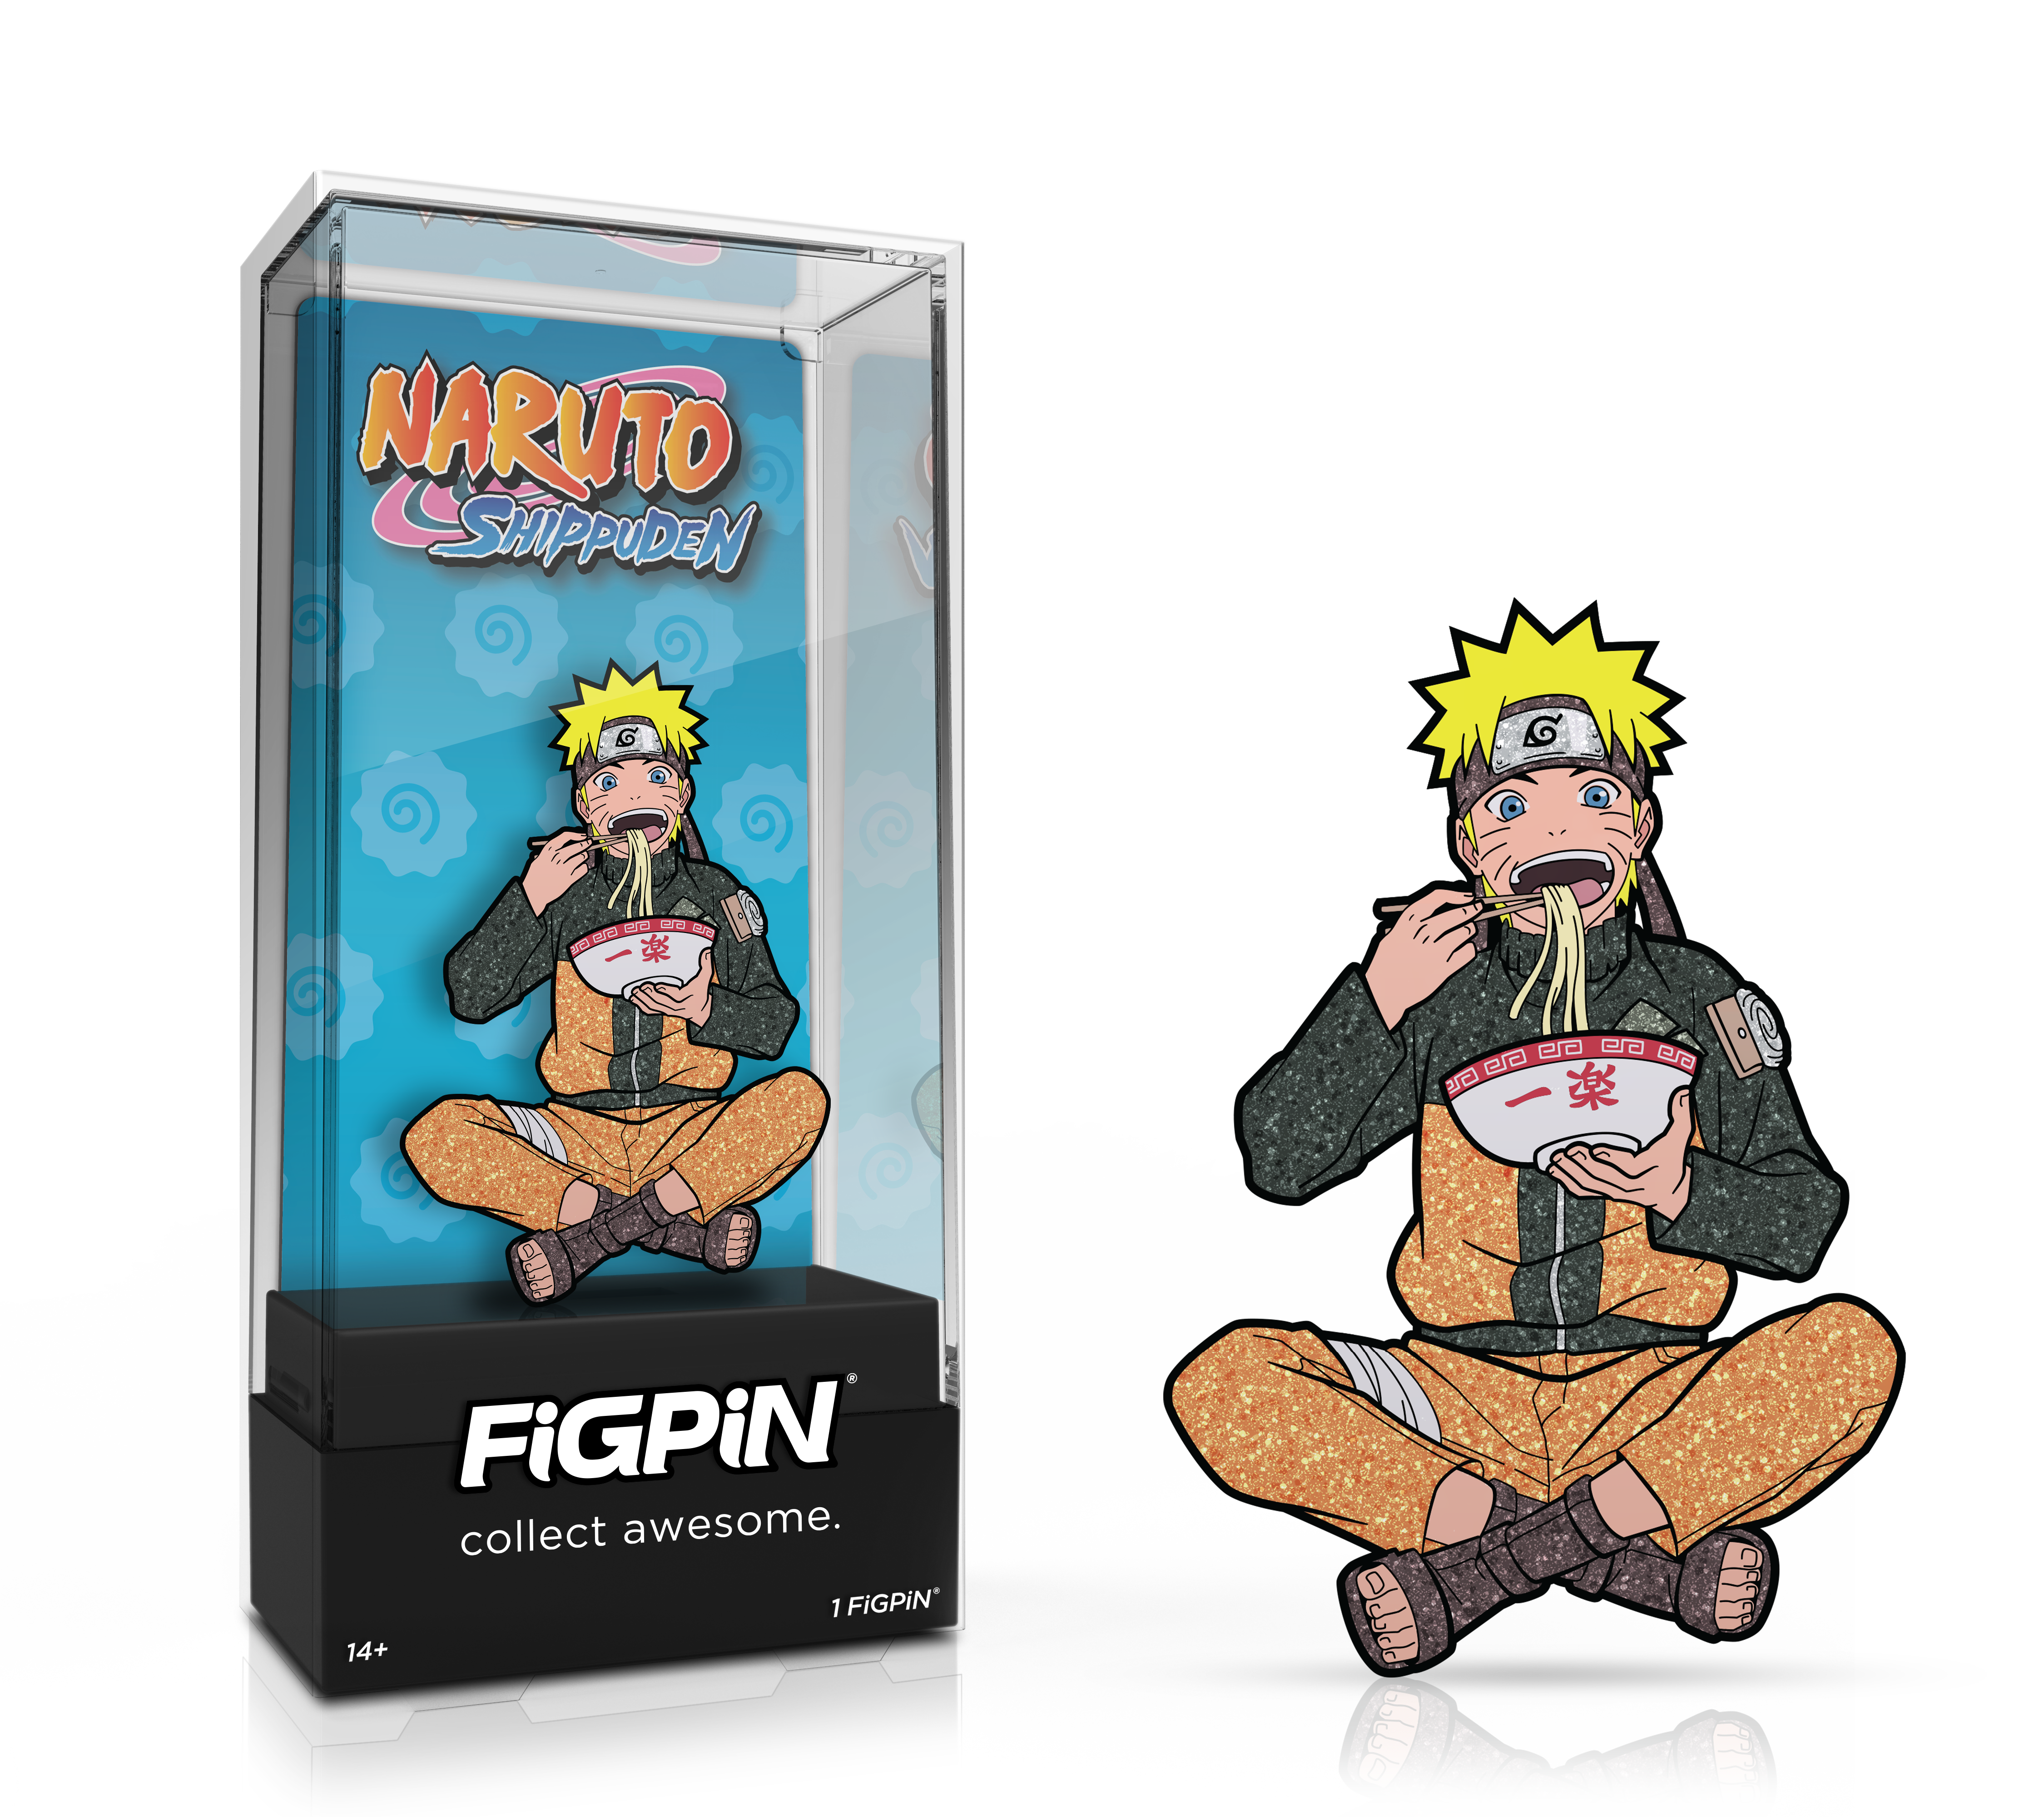 Side by side view of the Naruto Uzumaki (rare) enamel pin in display case and the art render.